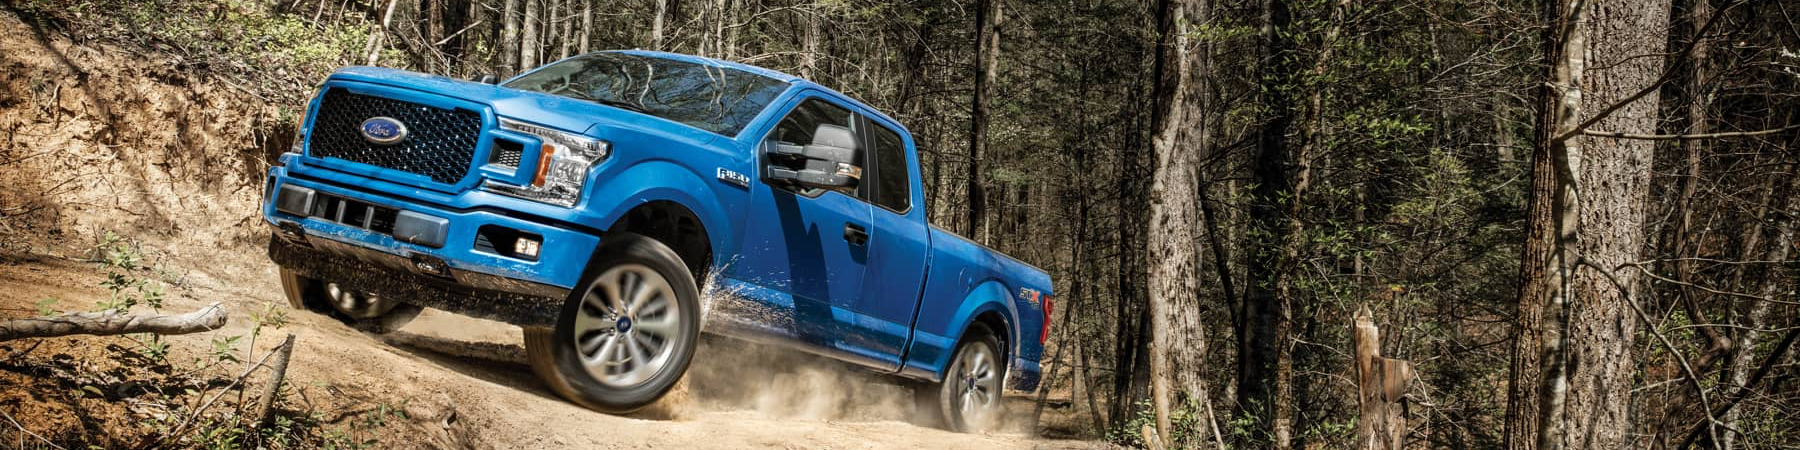 2020-Ford-F-150-drives-up forest trail